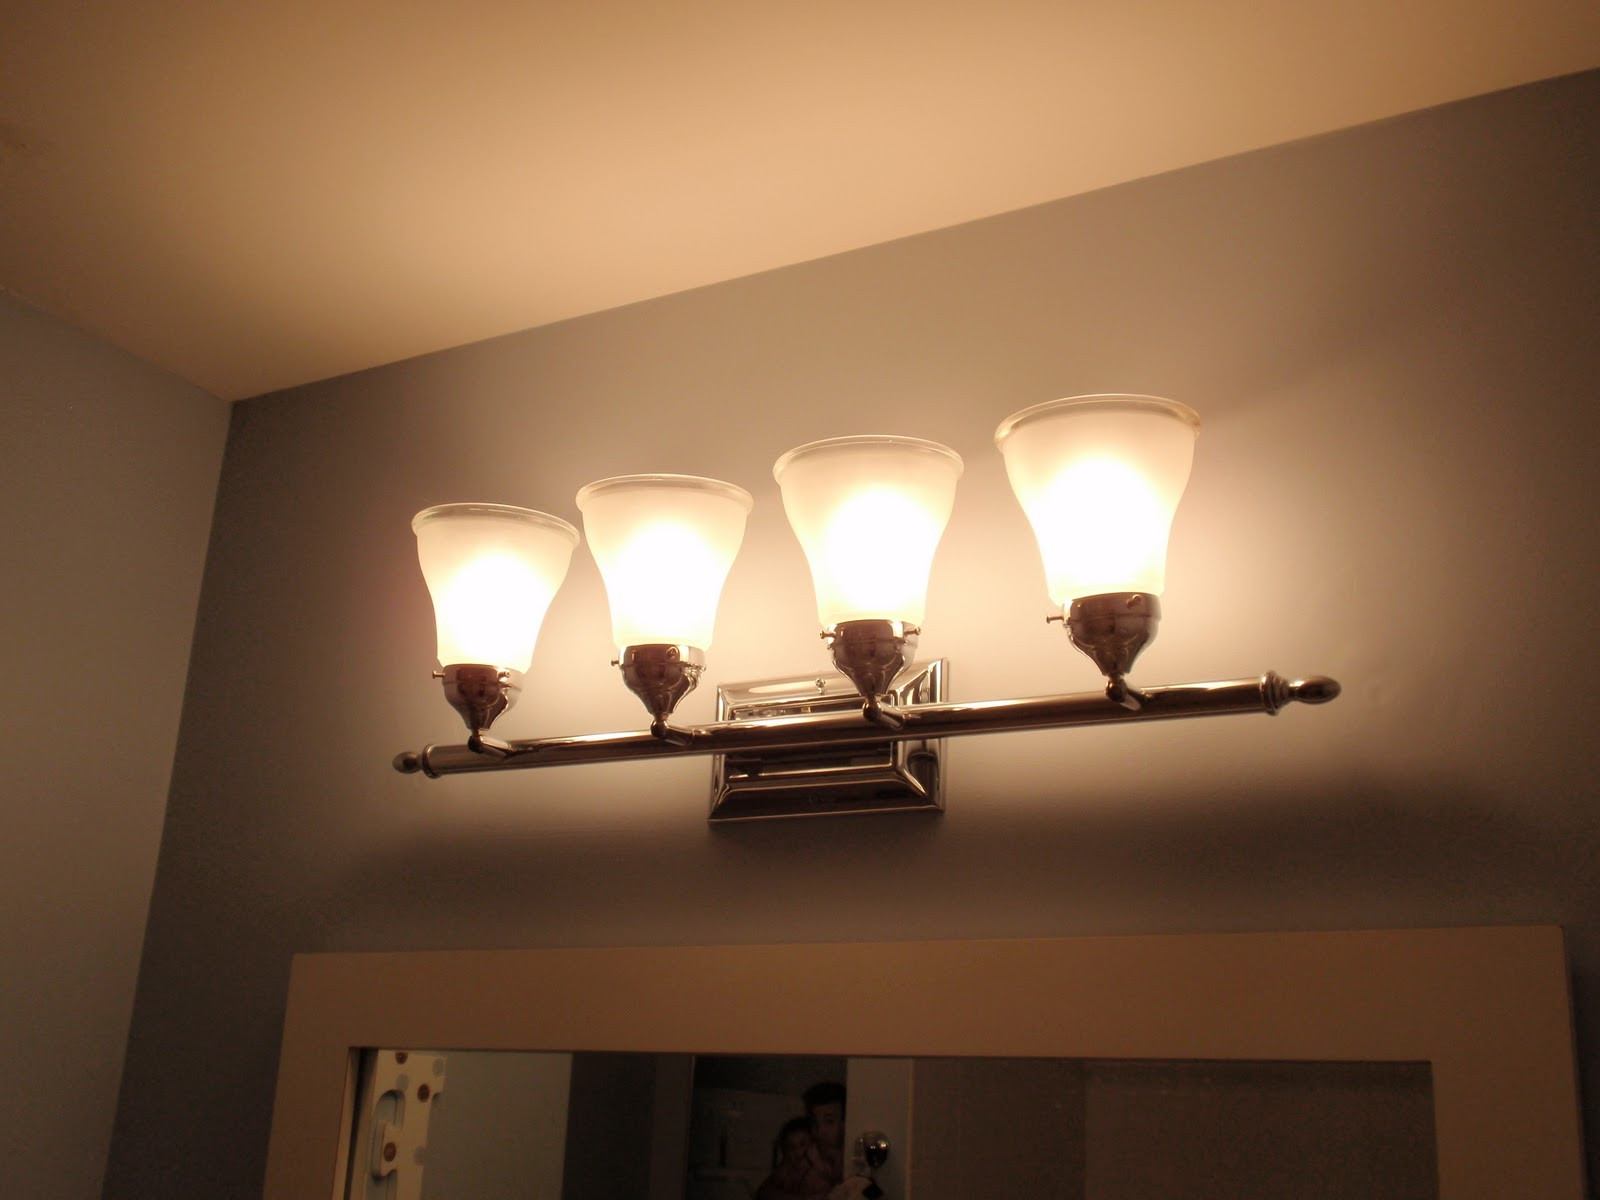 Bedroom Light Fixtures Lowes
 Ideas Vivacious Track Lights Lowes With Remarkable Styles